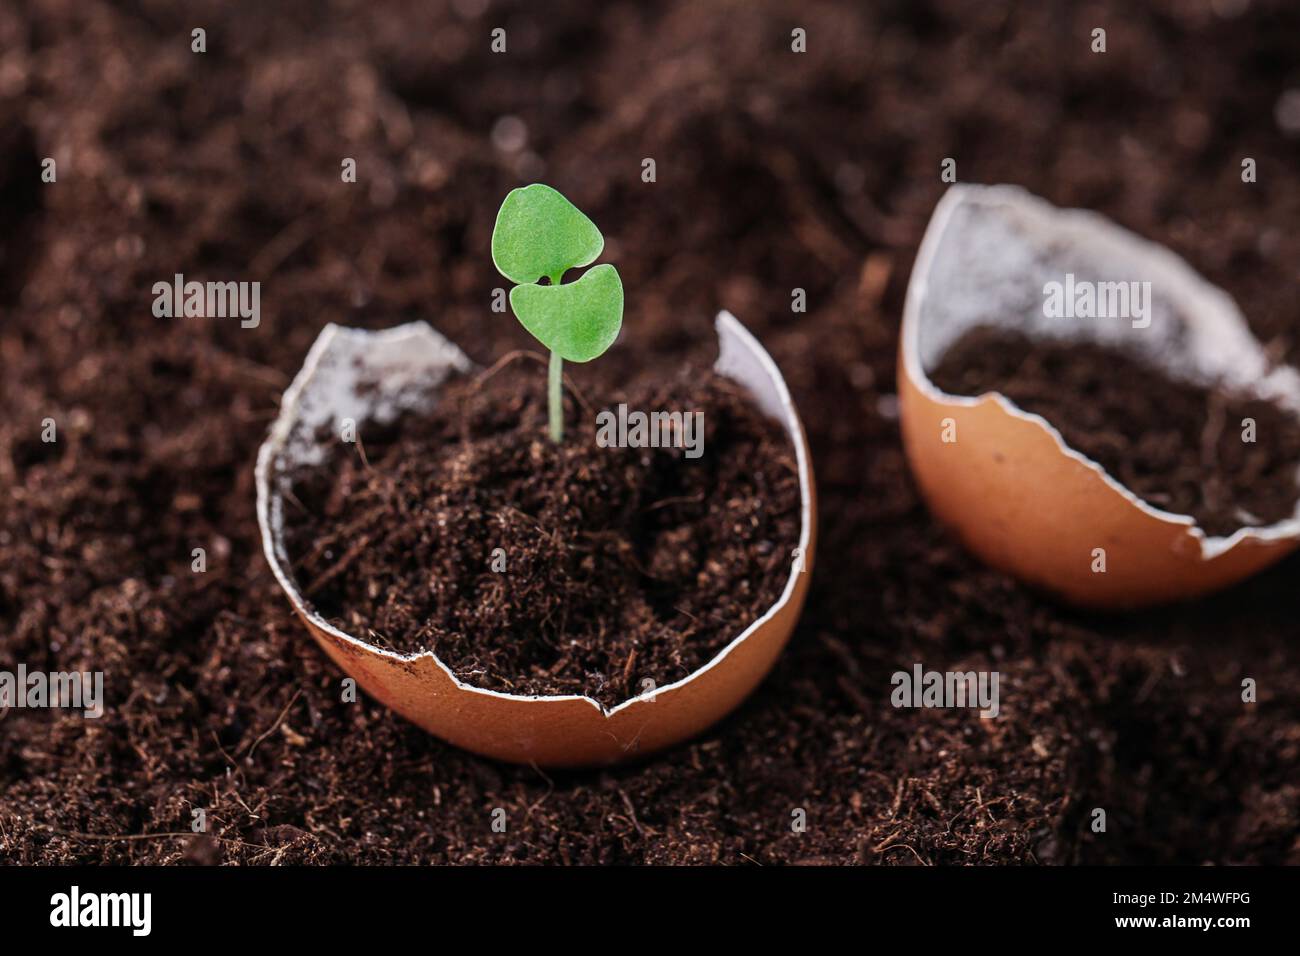 Egg shells as Natural Fertilizer. Young plants growing in egg shell. Gardening concept Stock Photo